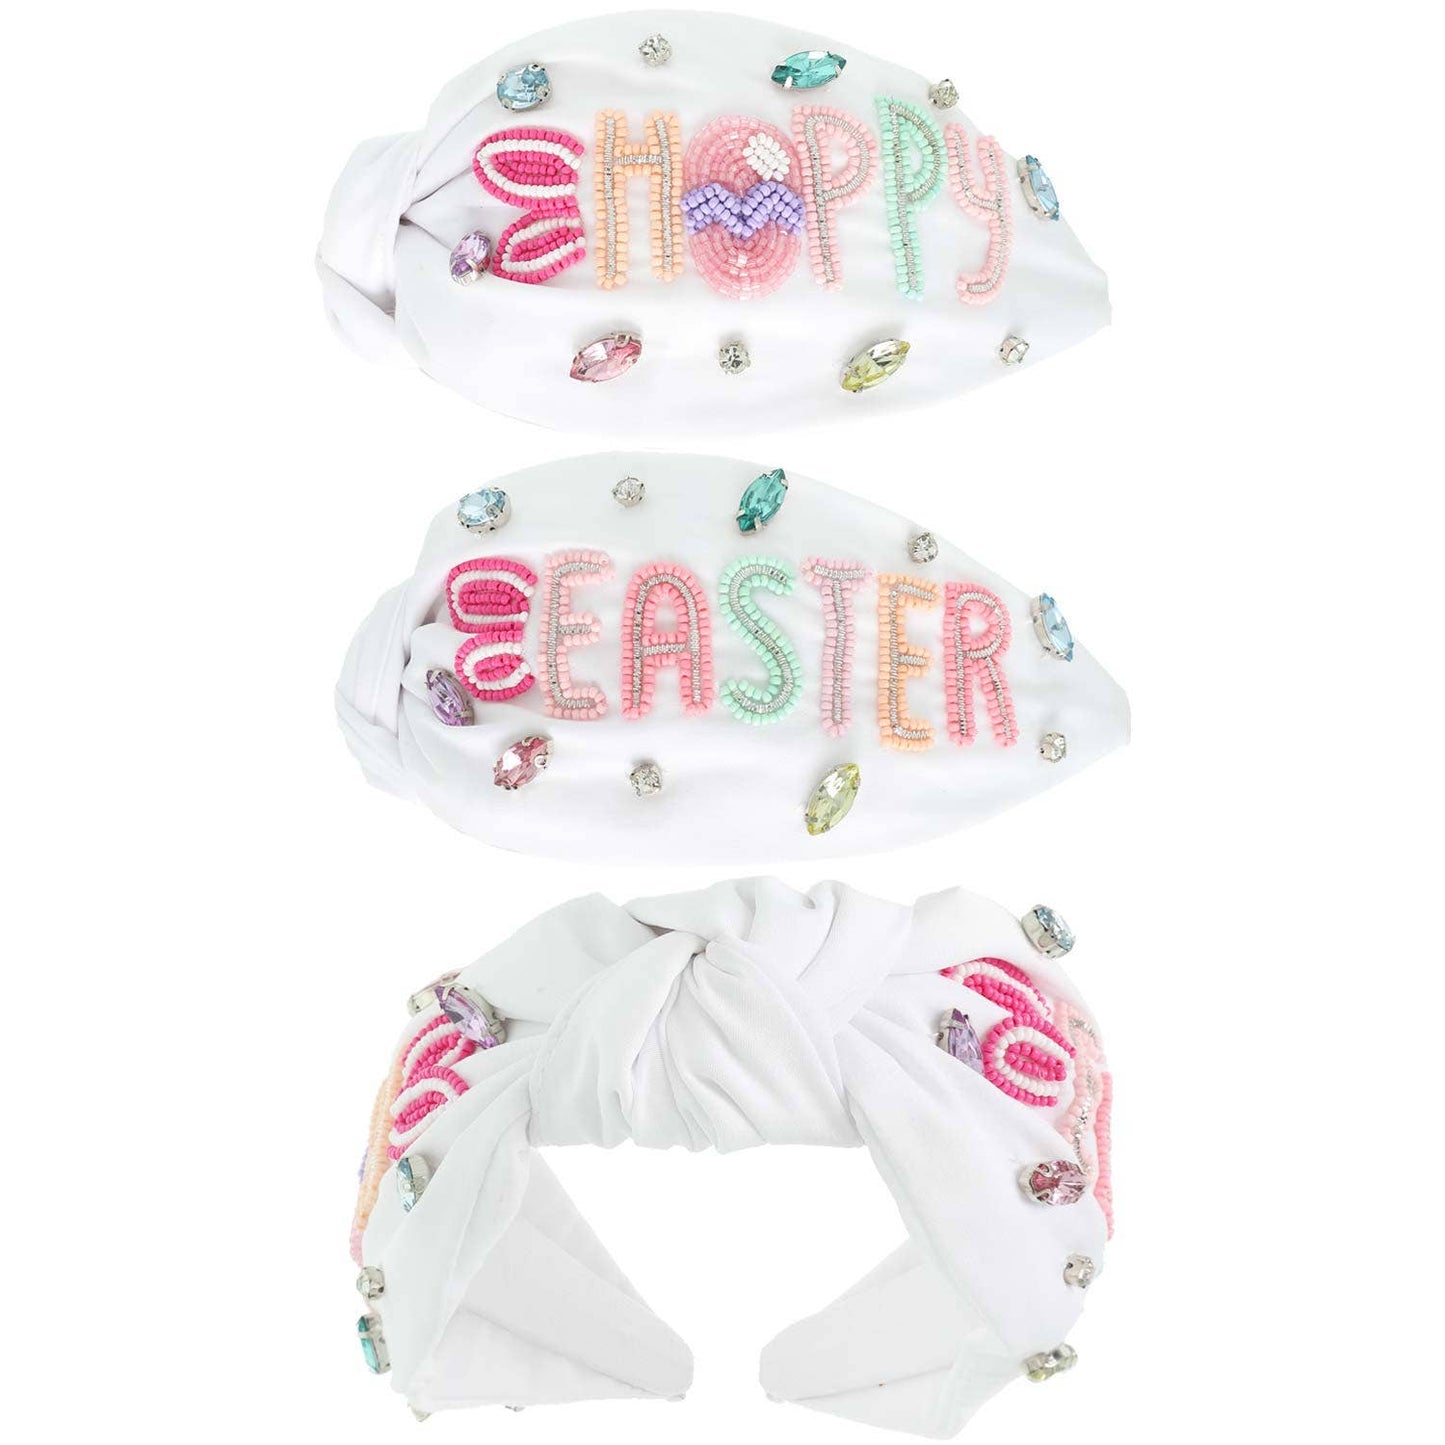 SP Sophia Collection - Hoppy Easter Pastel Beaded Top Knotted Headband